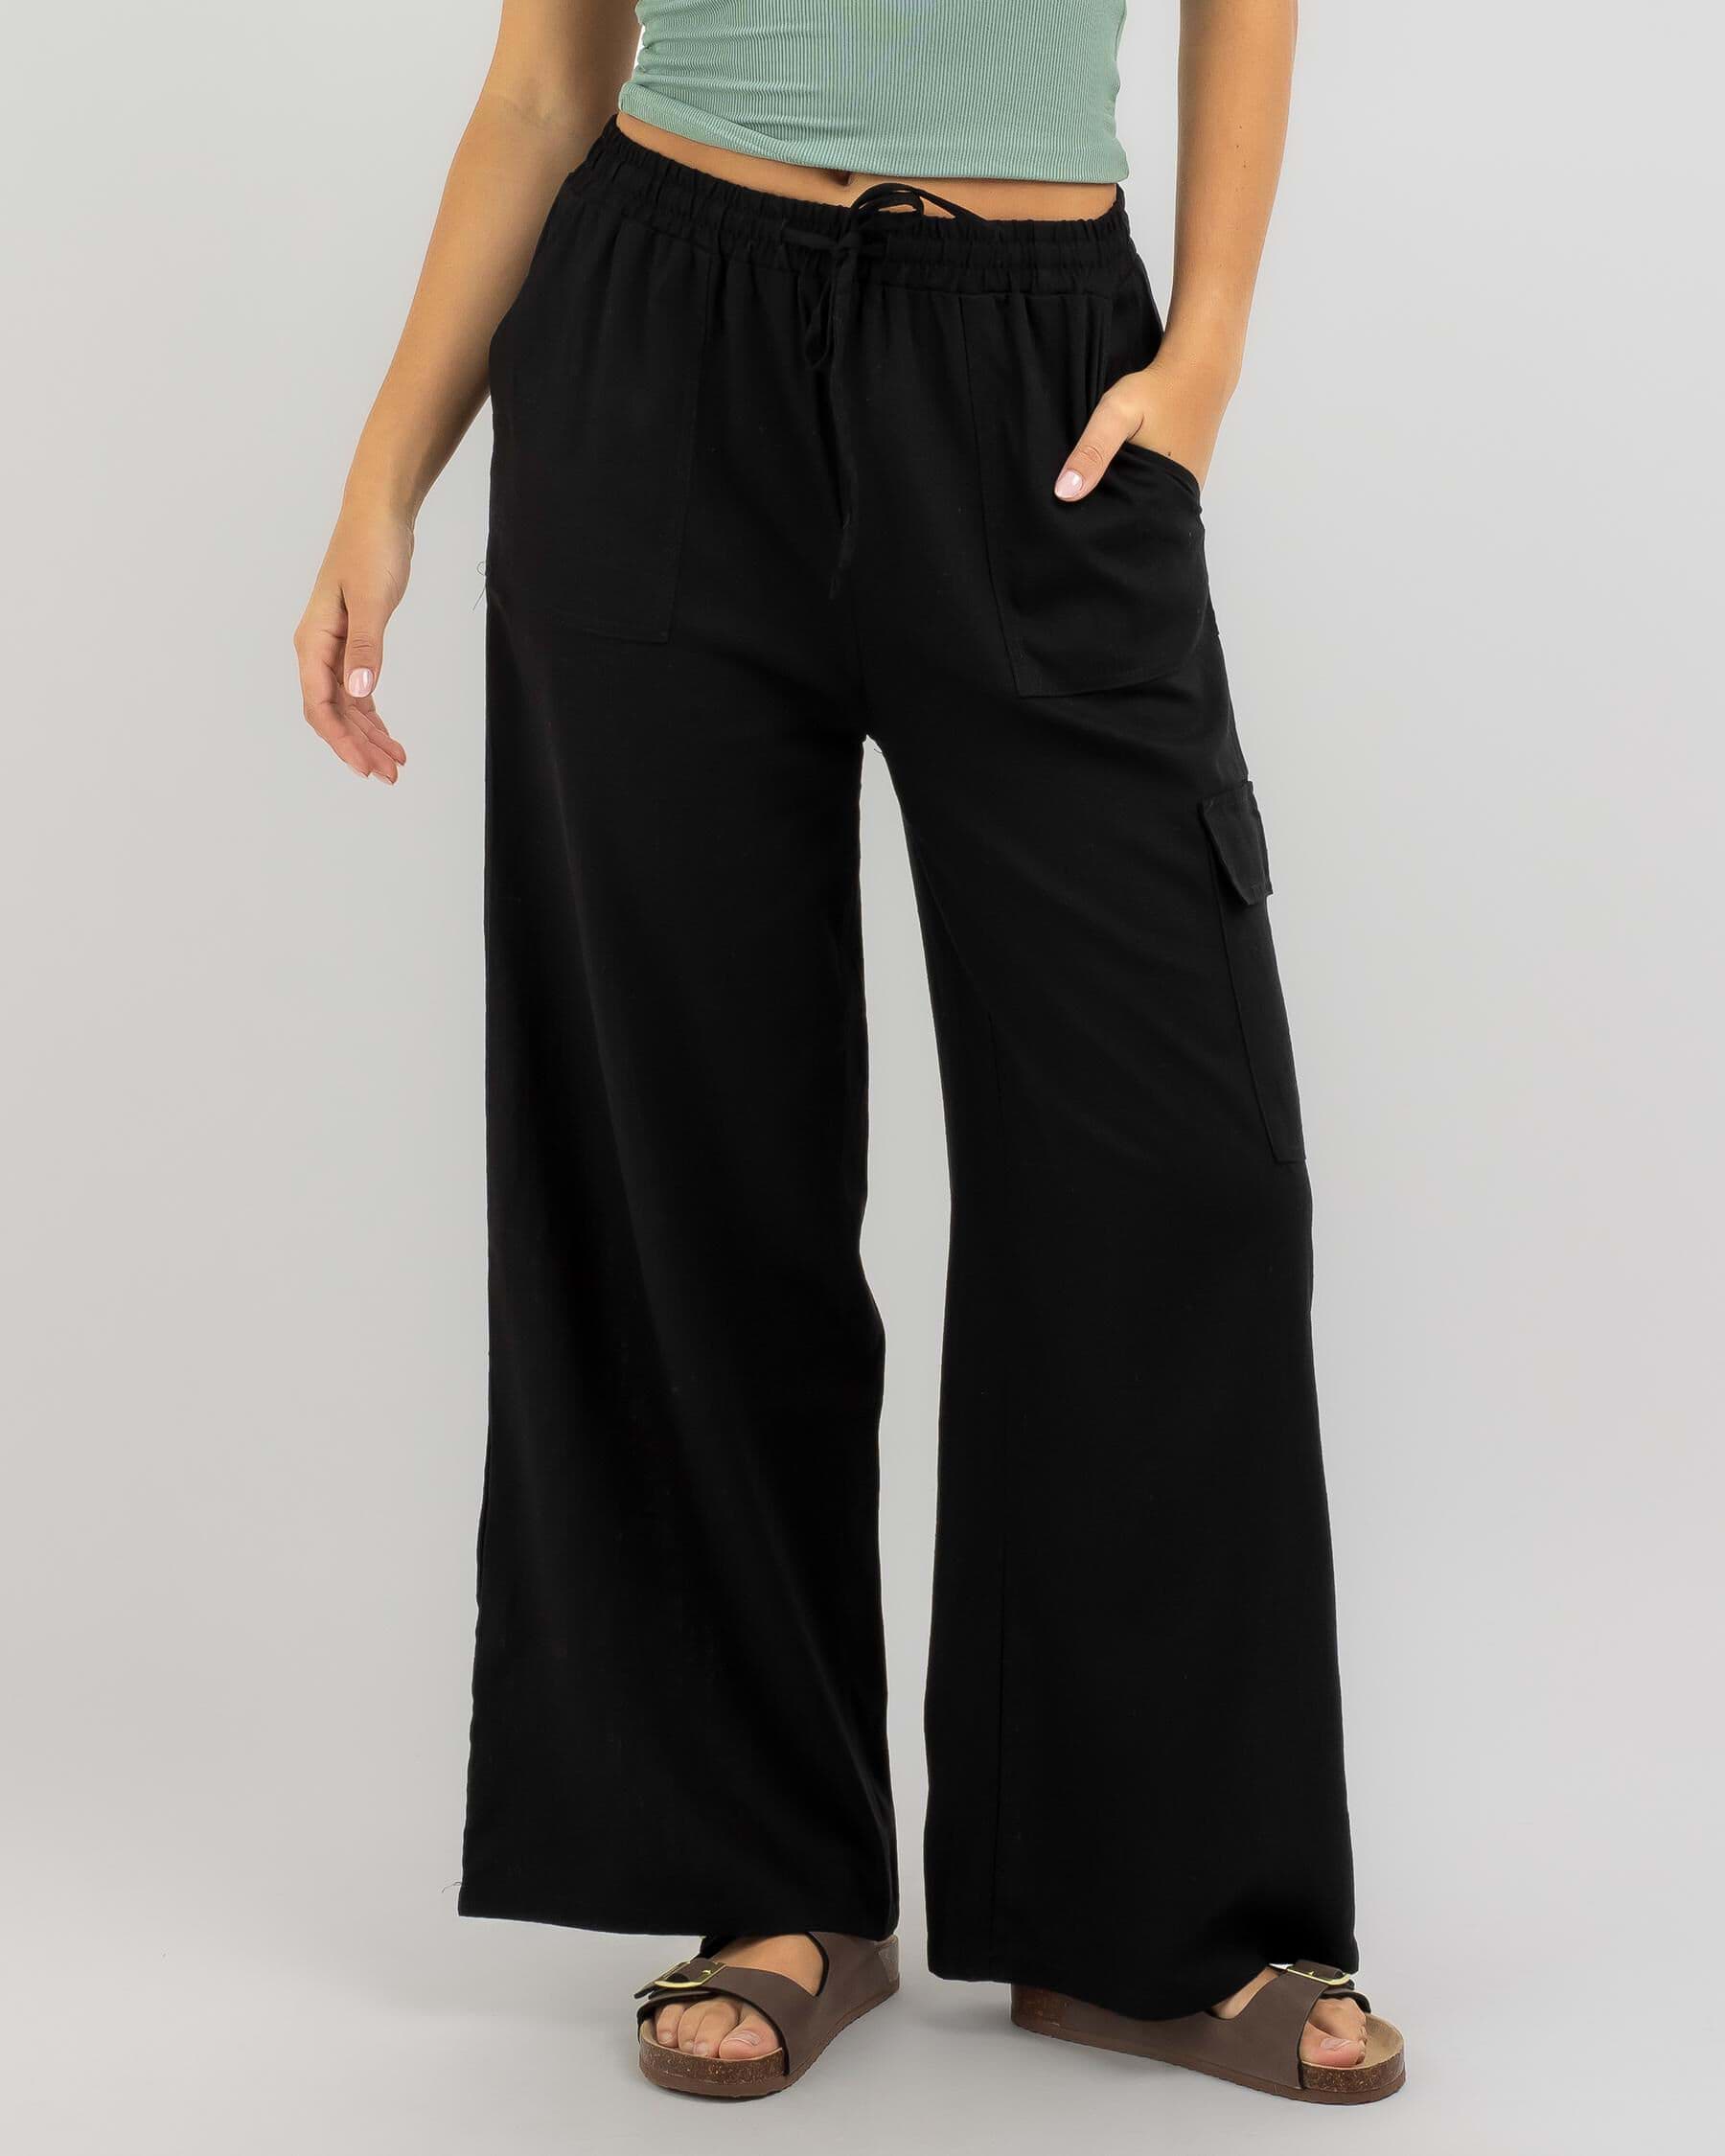 Shop Womens Pants Online - FREE* Shipping & Easy Returns - City